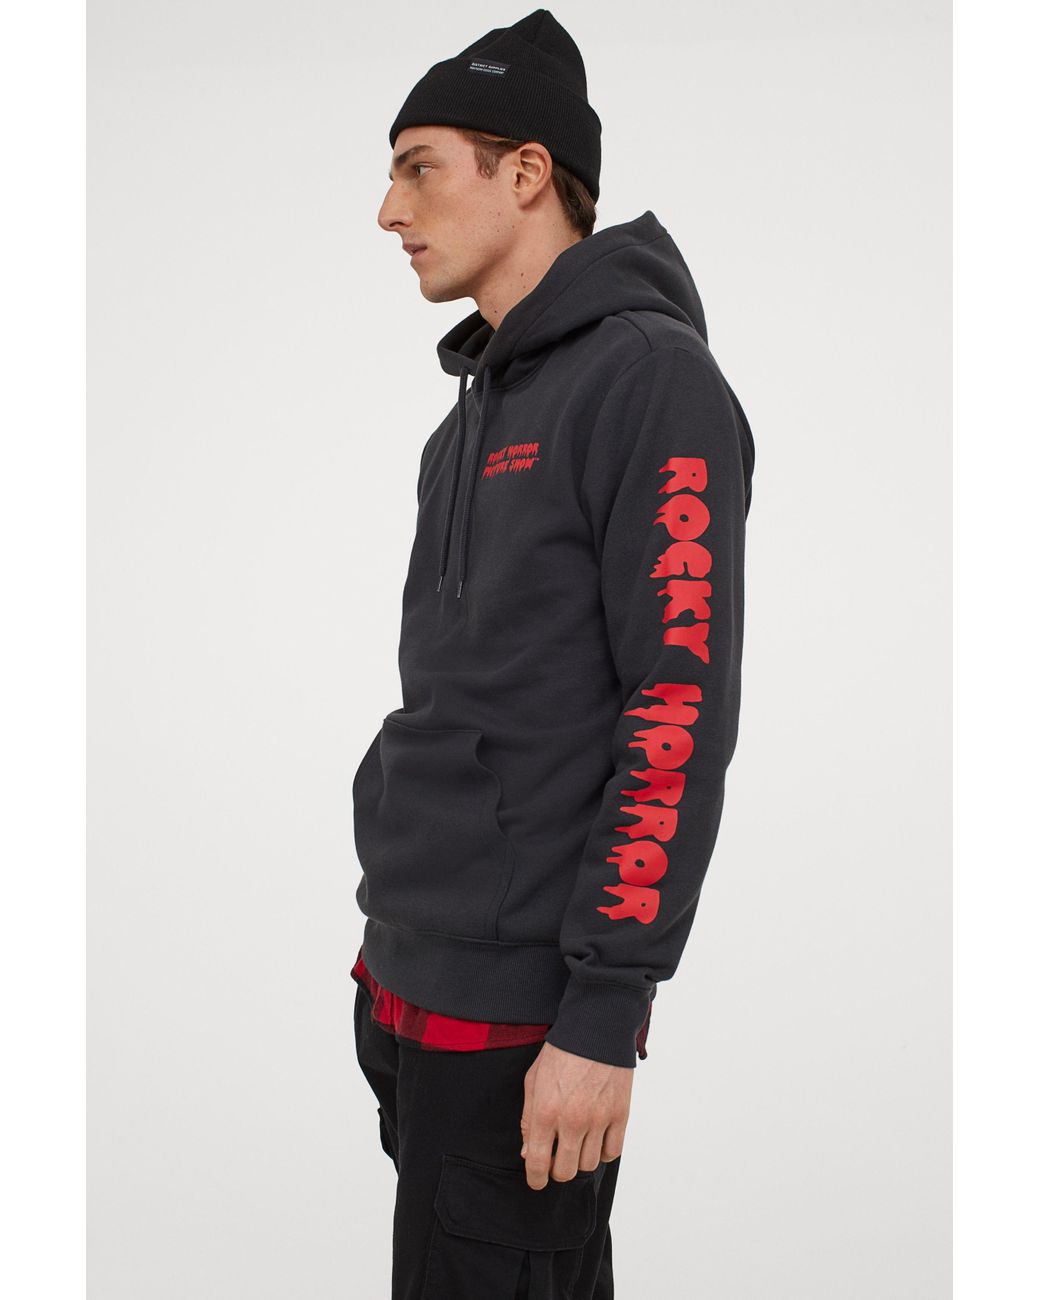 H&M Cotton Hoodie in Black for Men - Lyst